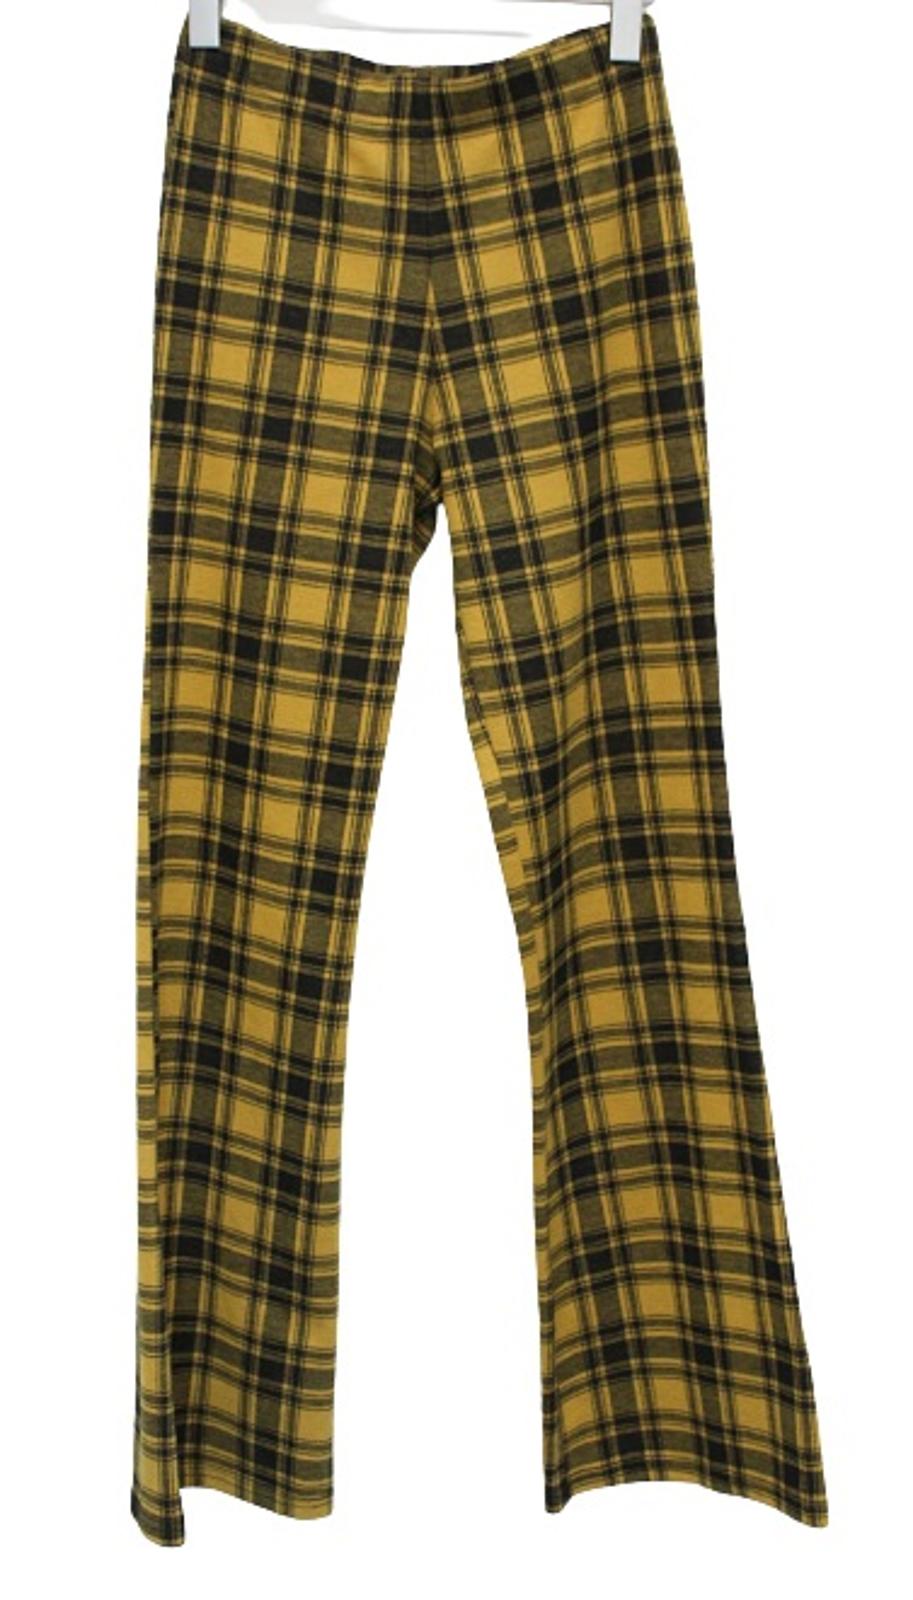 FOREVER 21 Ladies Yellow Black Checked Elasticated Waist Trousers S W26 L32